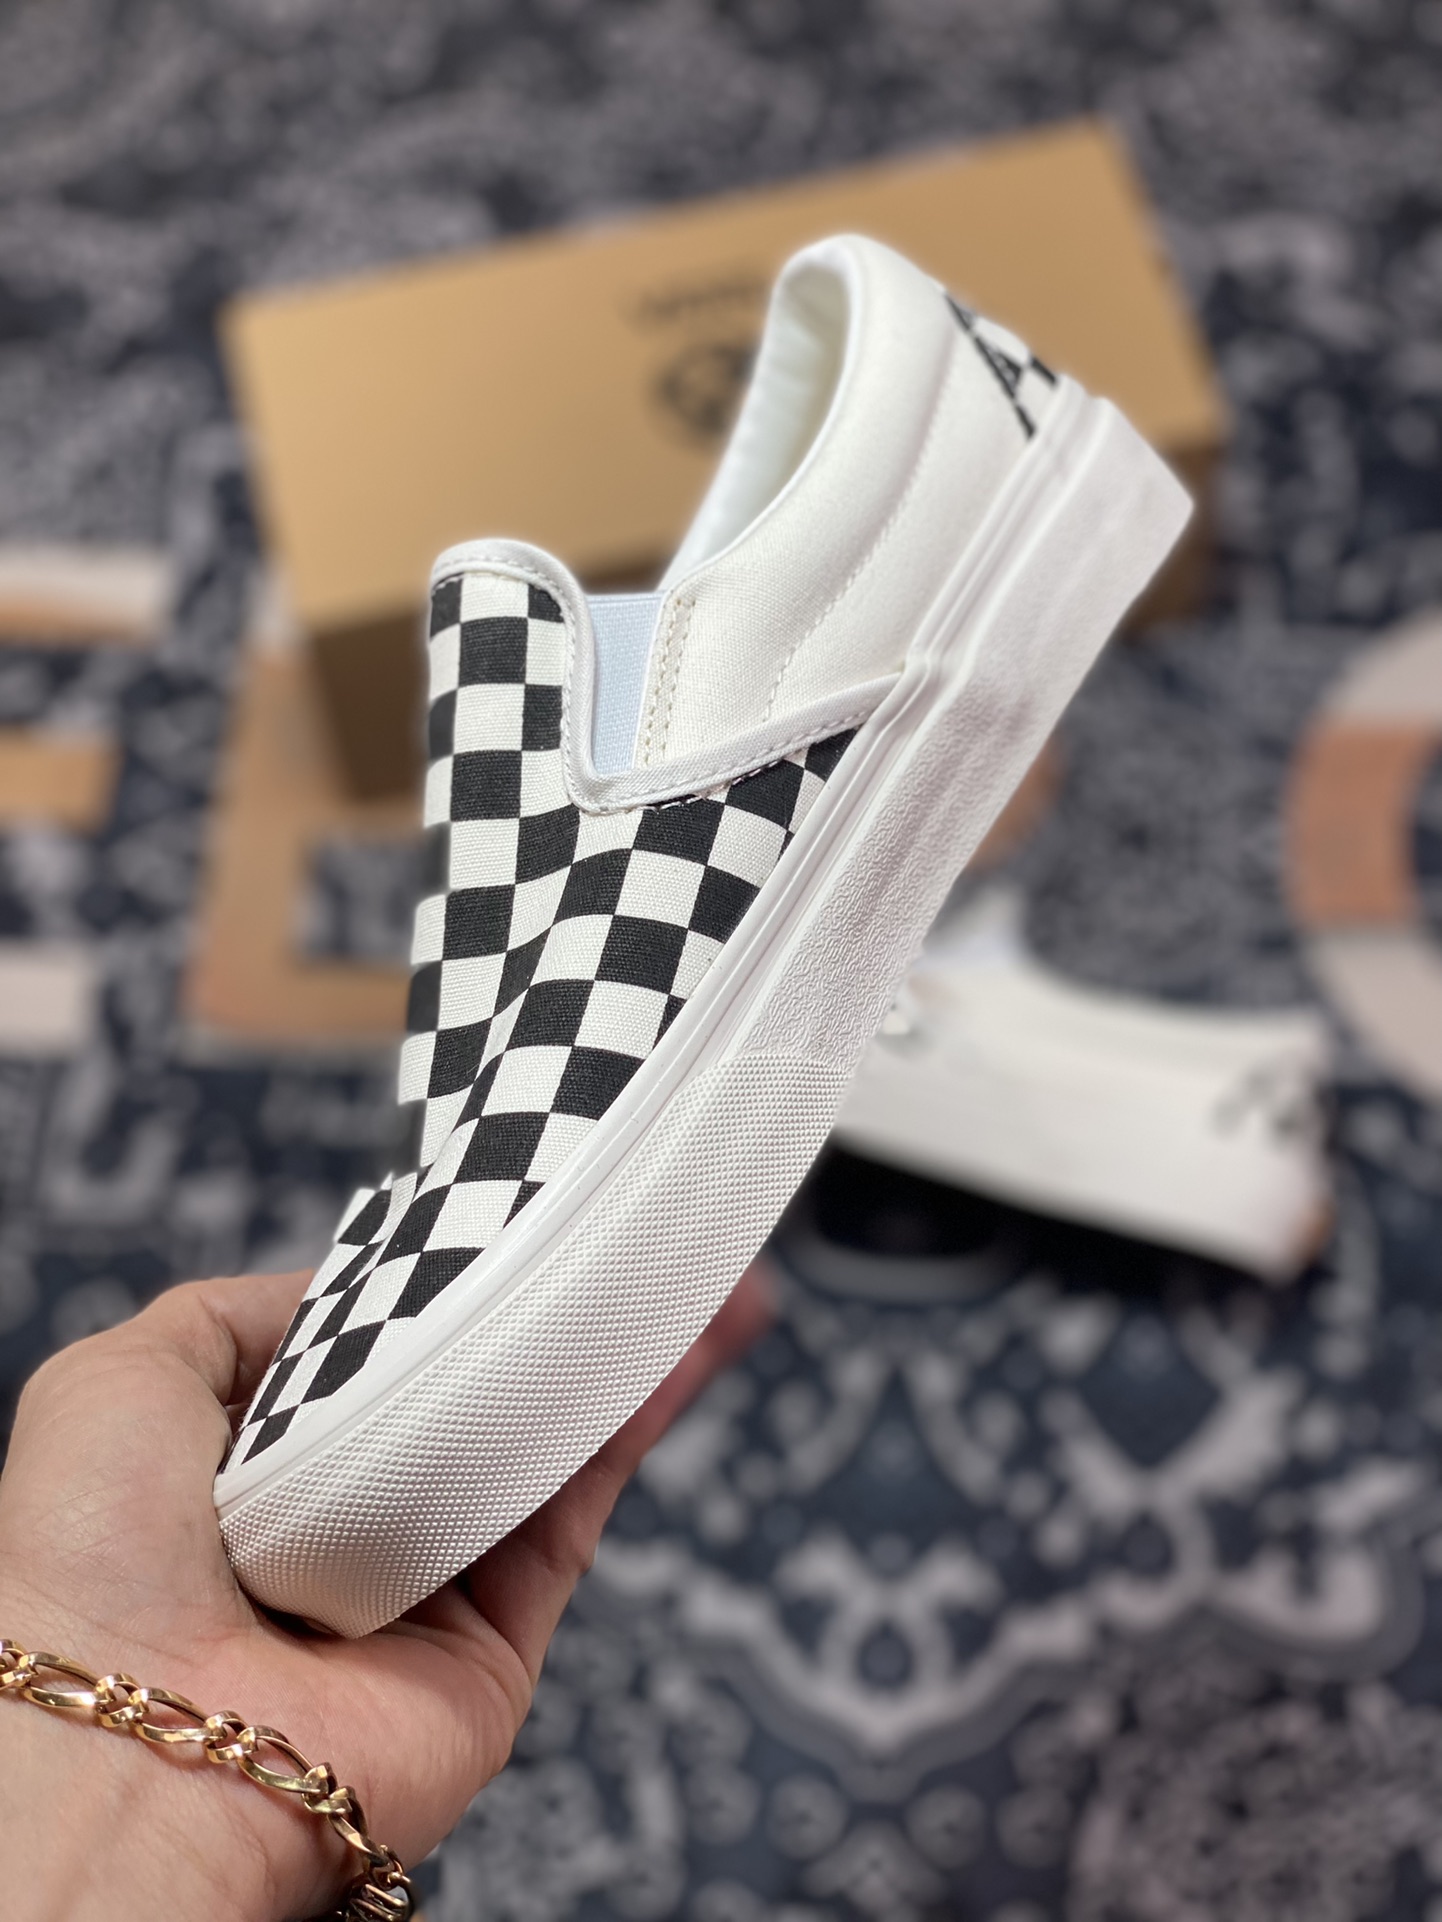 Vans Slip-on VR3 black and white checkerboard Vans official comfortable slip-on casual canvas shoes